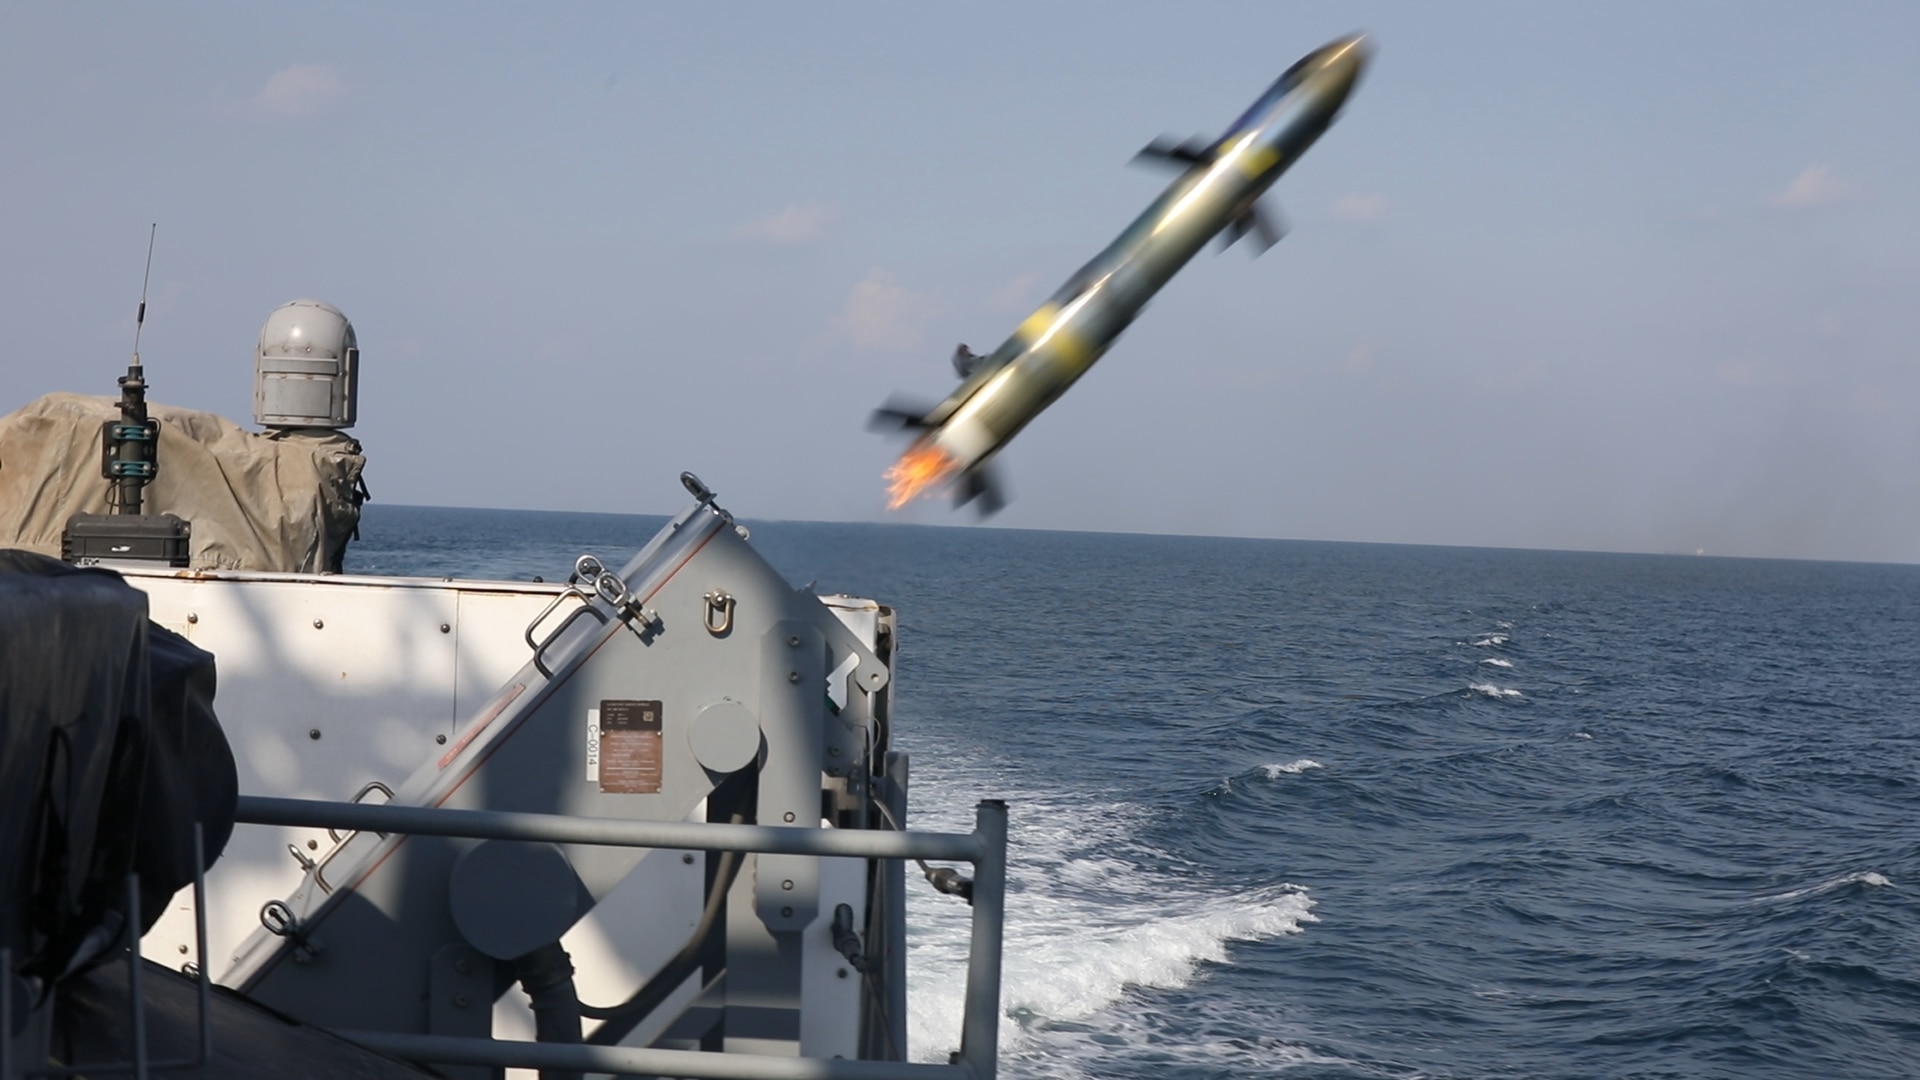 Cyclone class Patrol (coastal) ship USS Tempest (PC 2), fires a Griffin Missile during a test and proficiency fire in the Arabian Gulf Nov. 5. Tempest, assigned to Commander, Task Force (CTF) 55, is supporting maritime security operations and theatre security cooperation efforts in the U.S. 5th Fleet area of operations.